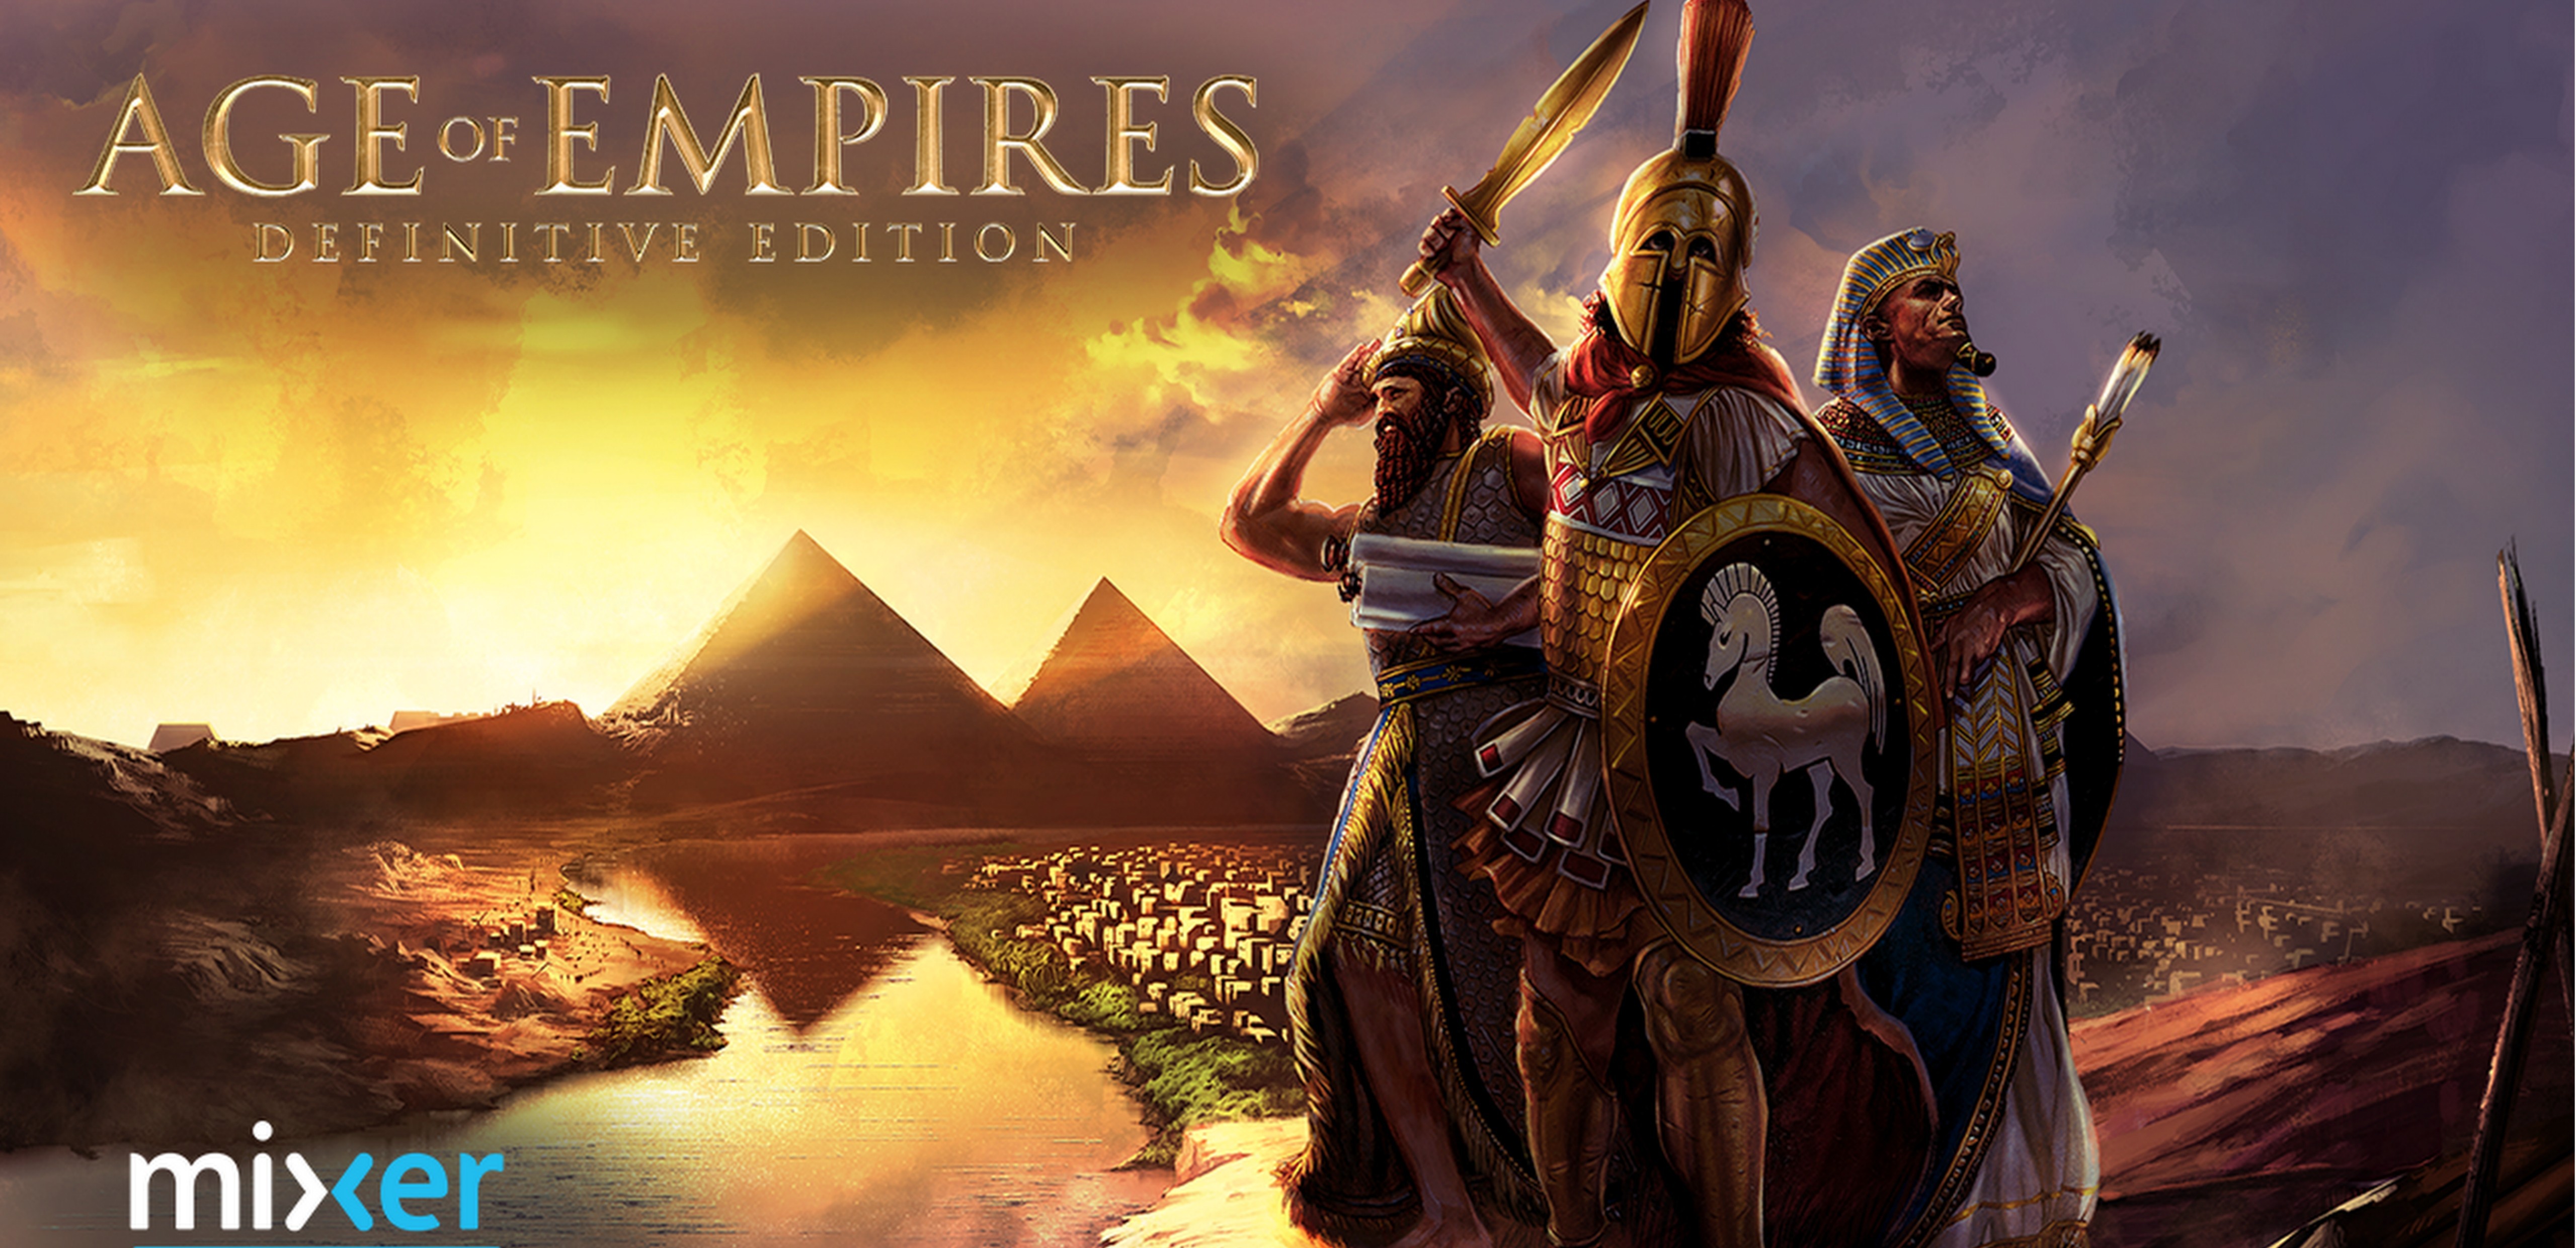 age of empires hd edition download